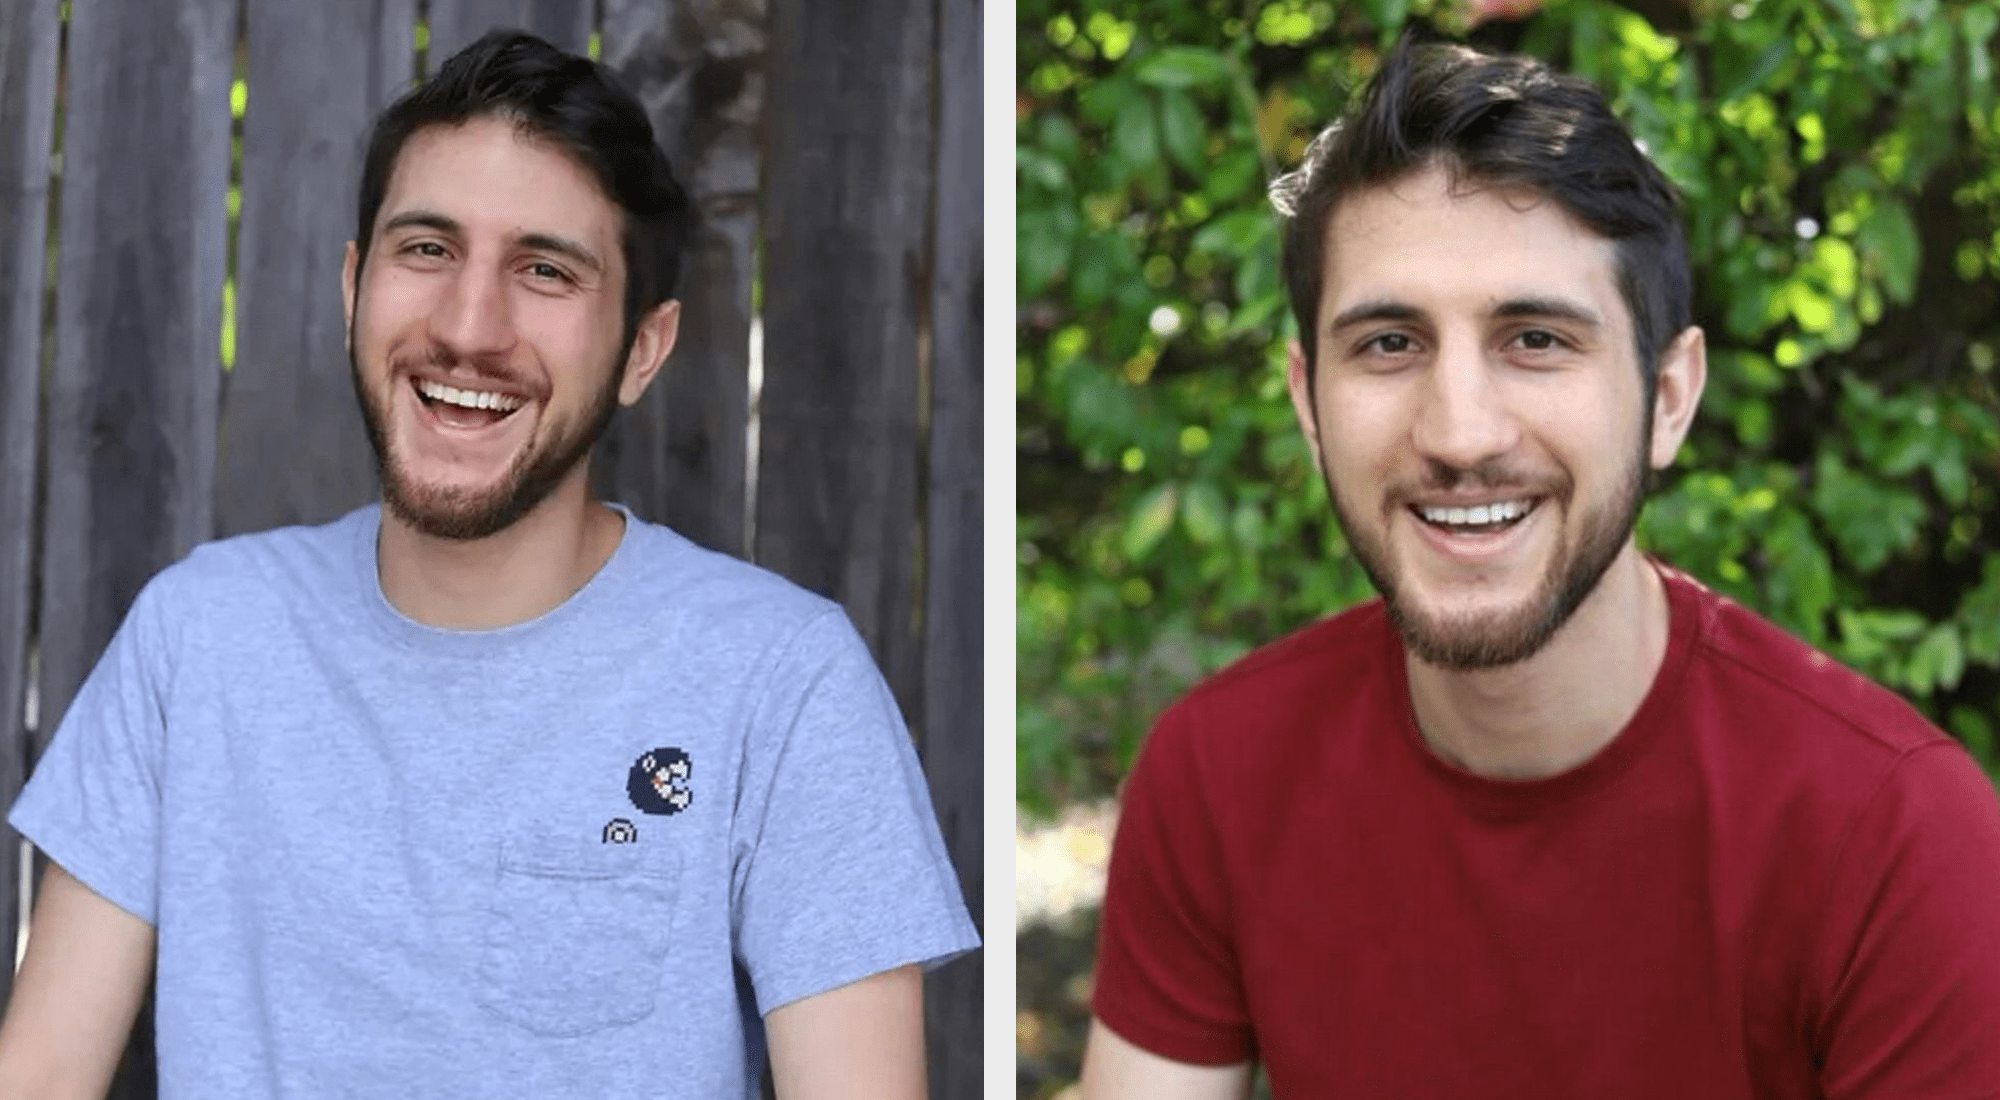 Mario and Luigi's new voice actor, Kevin Afghani, looks handsome and smiley in two headshots that have been doing the rounds online.